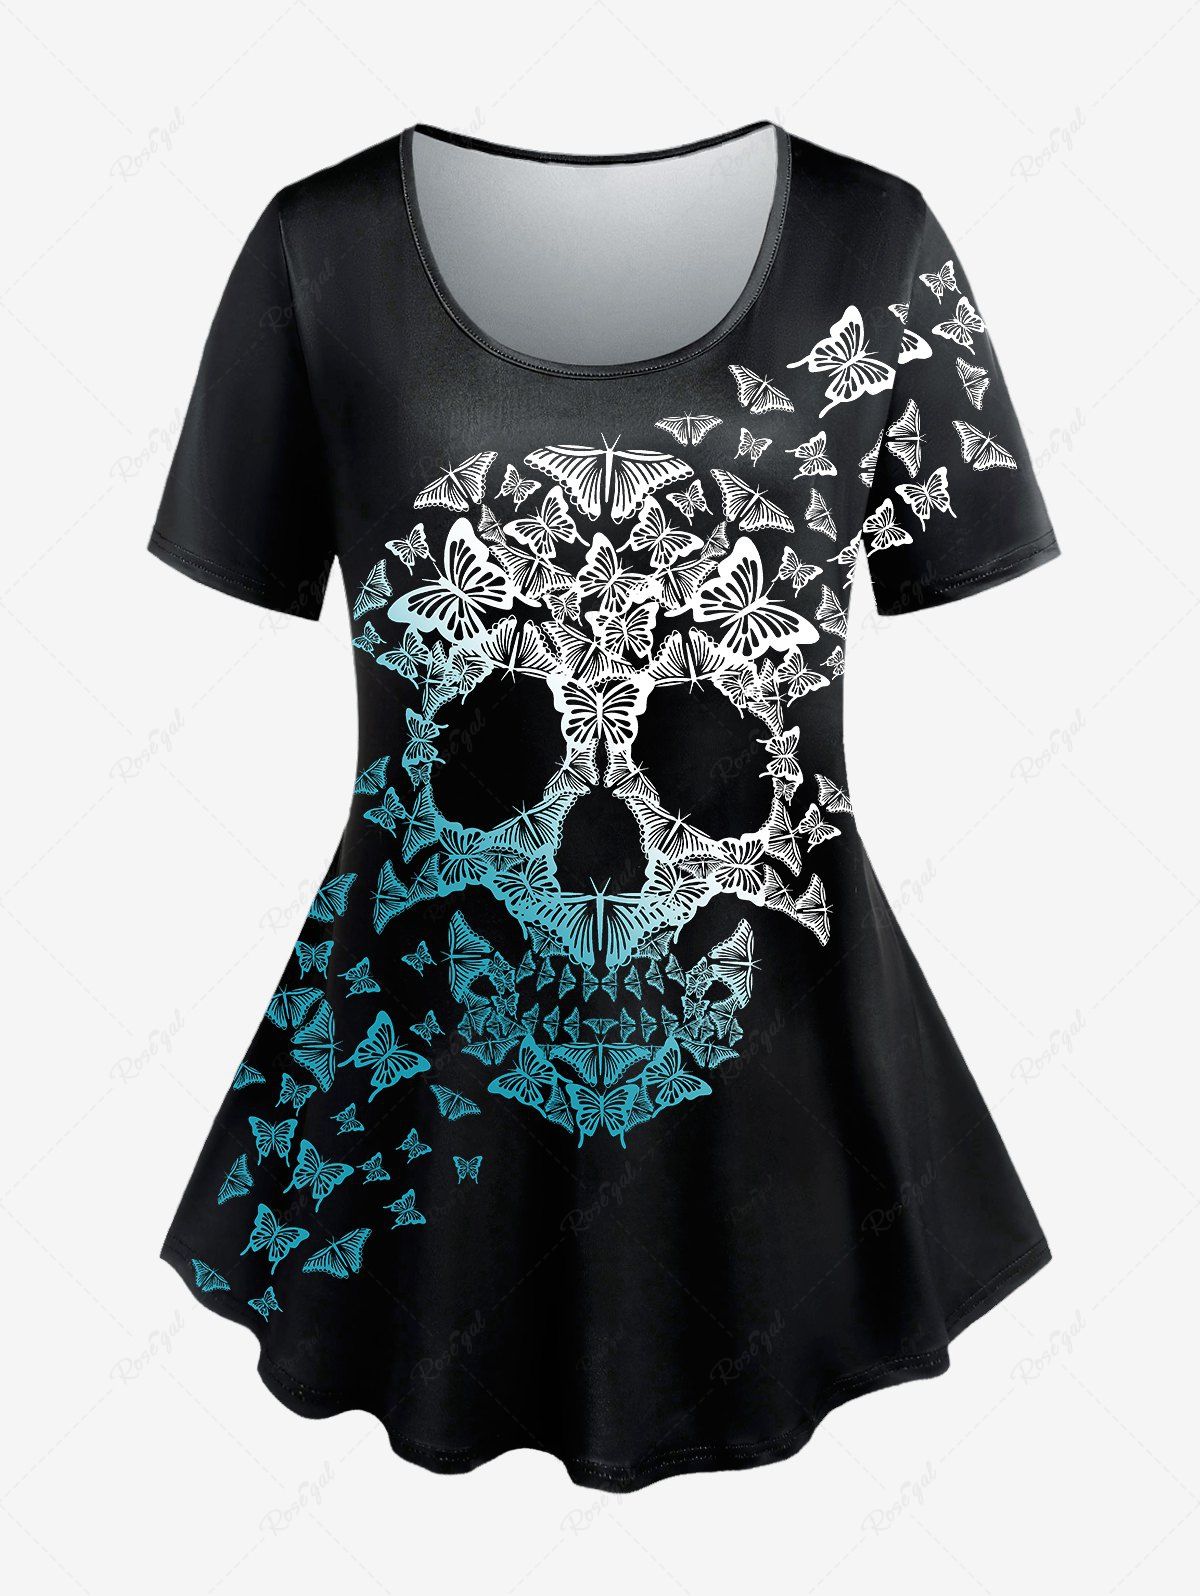 Chic Gothic Skull Butterfly Print Tee  